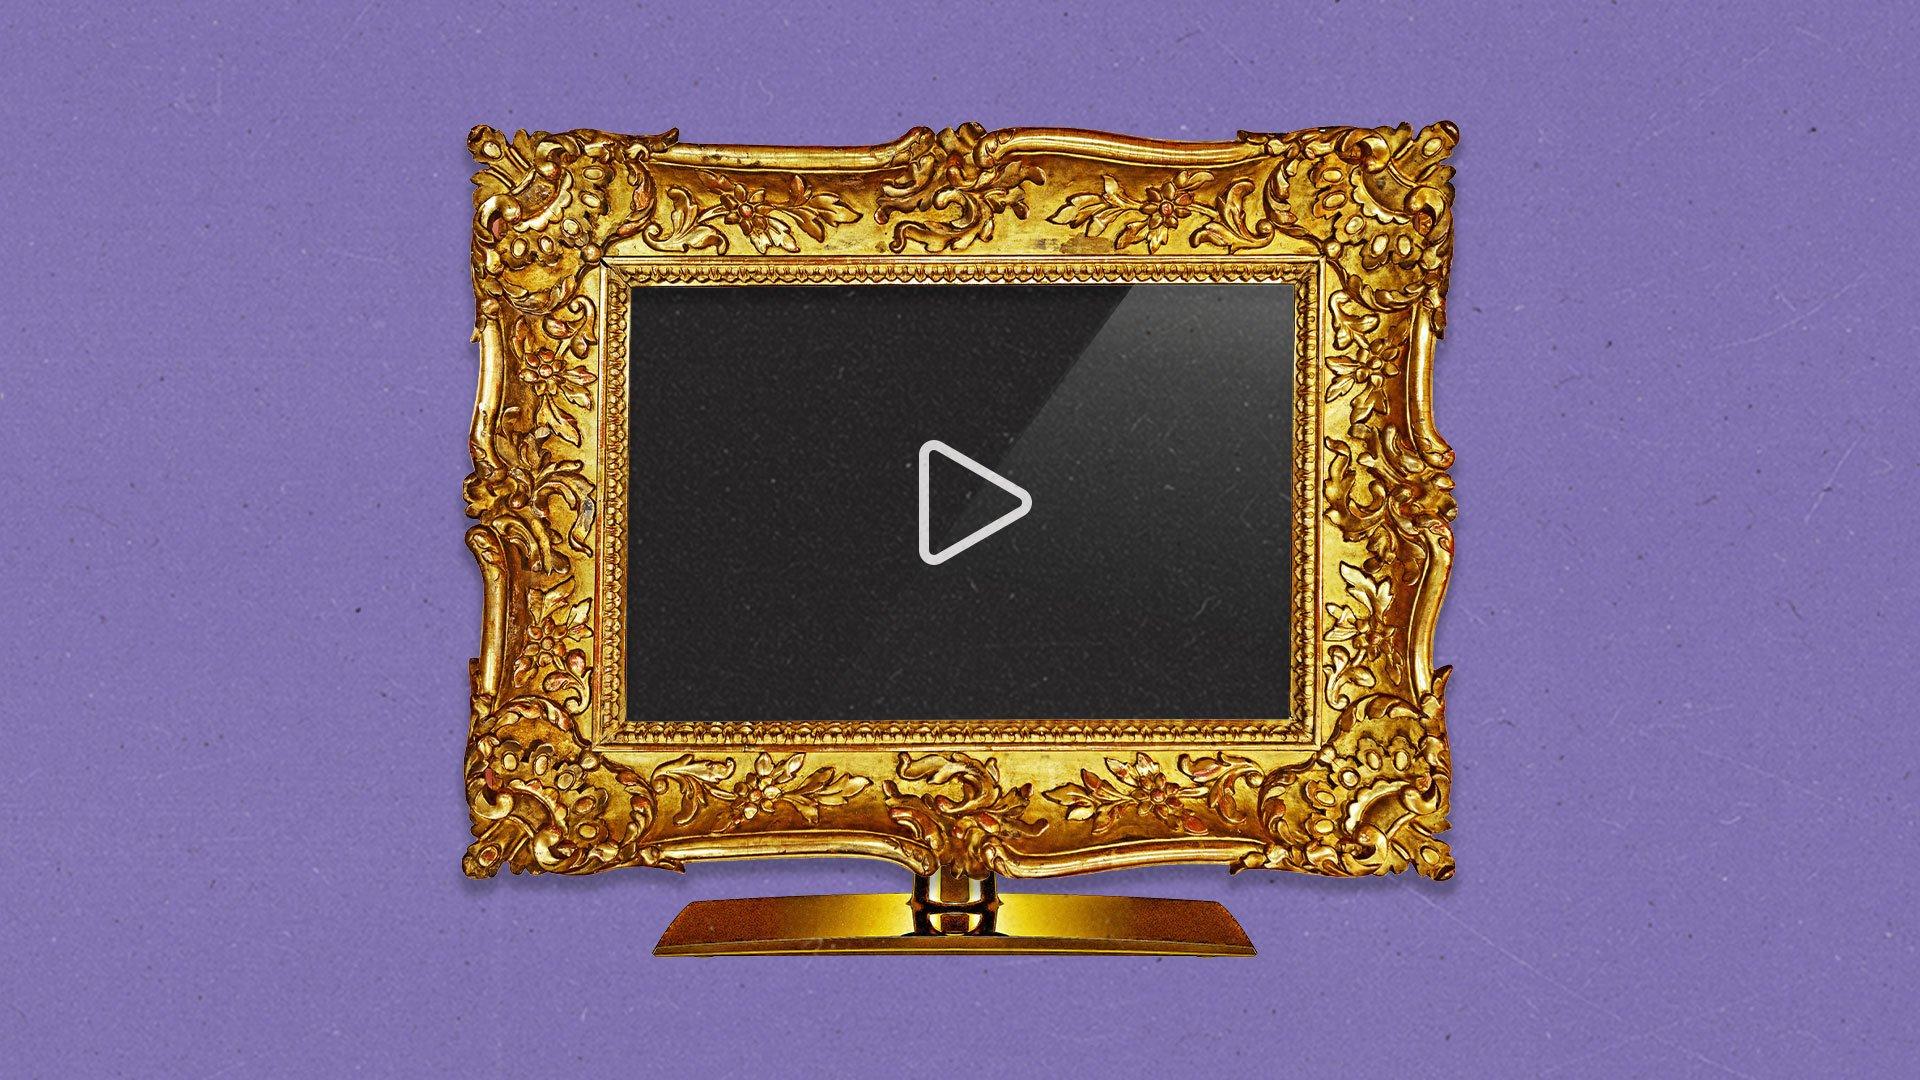 A TV screen with a gold decorative frame shows a play button on the screen.